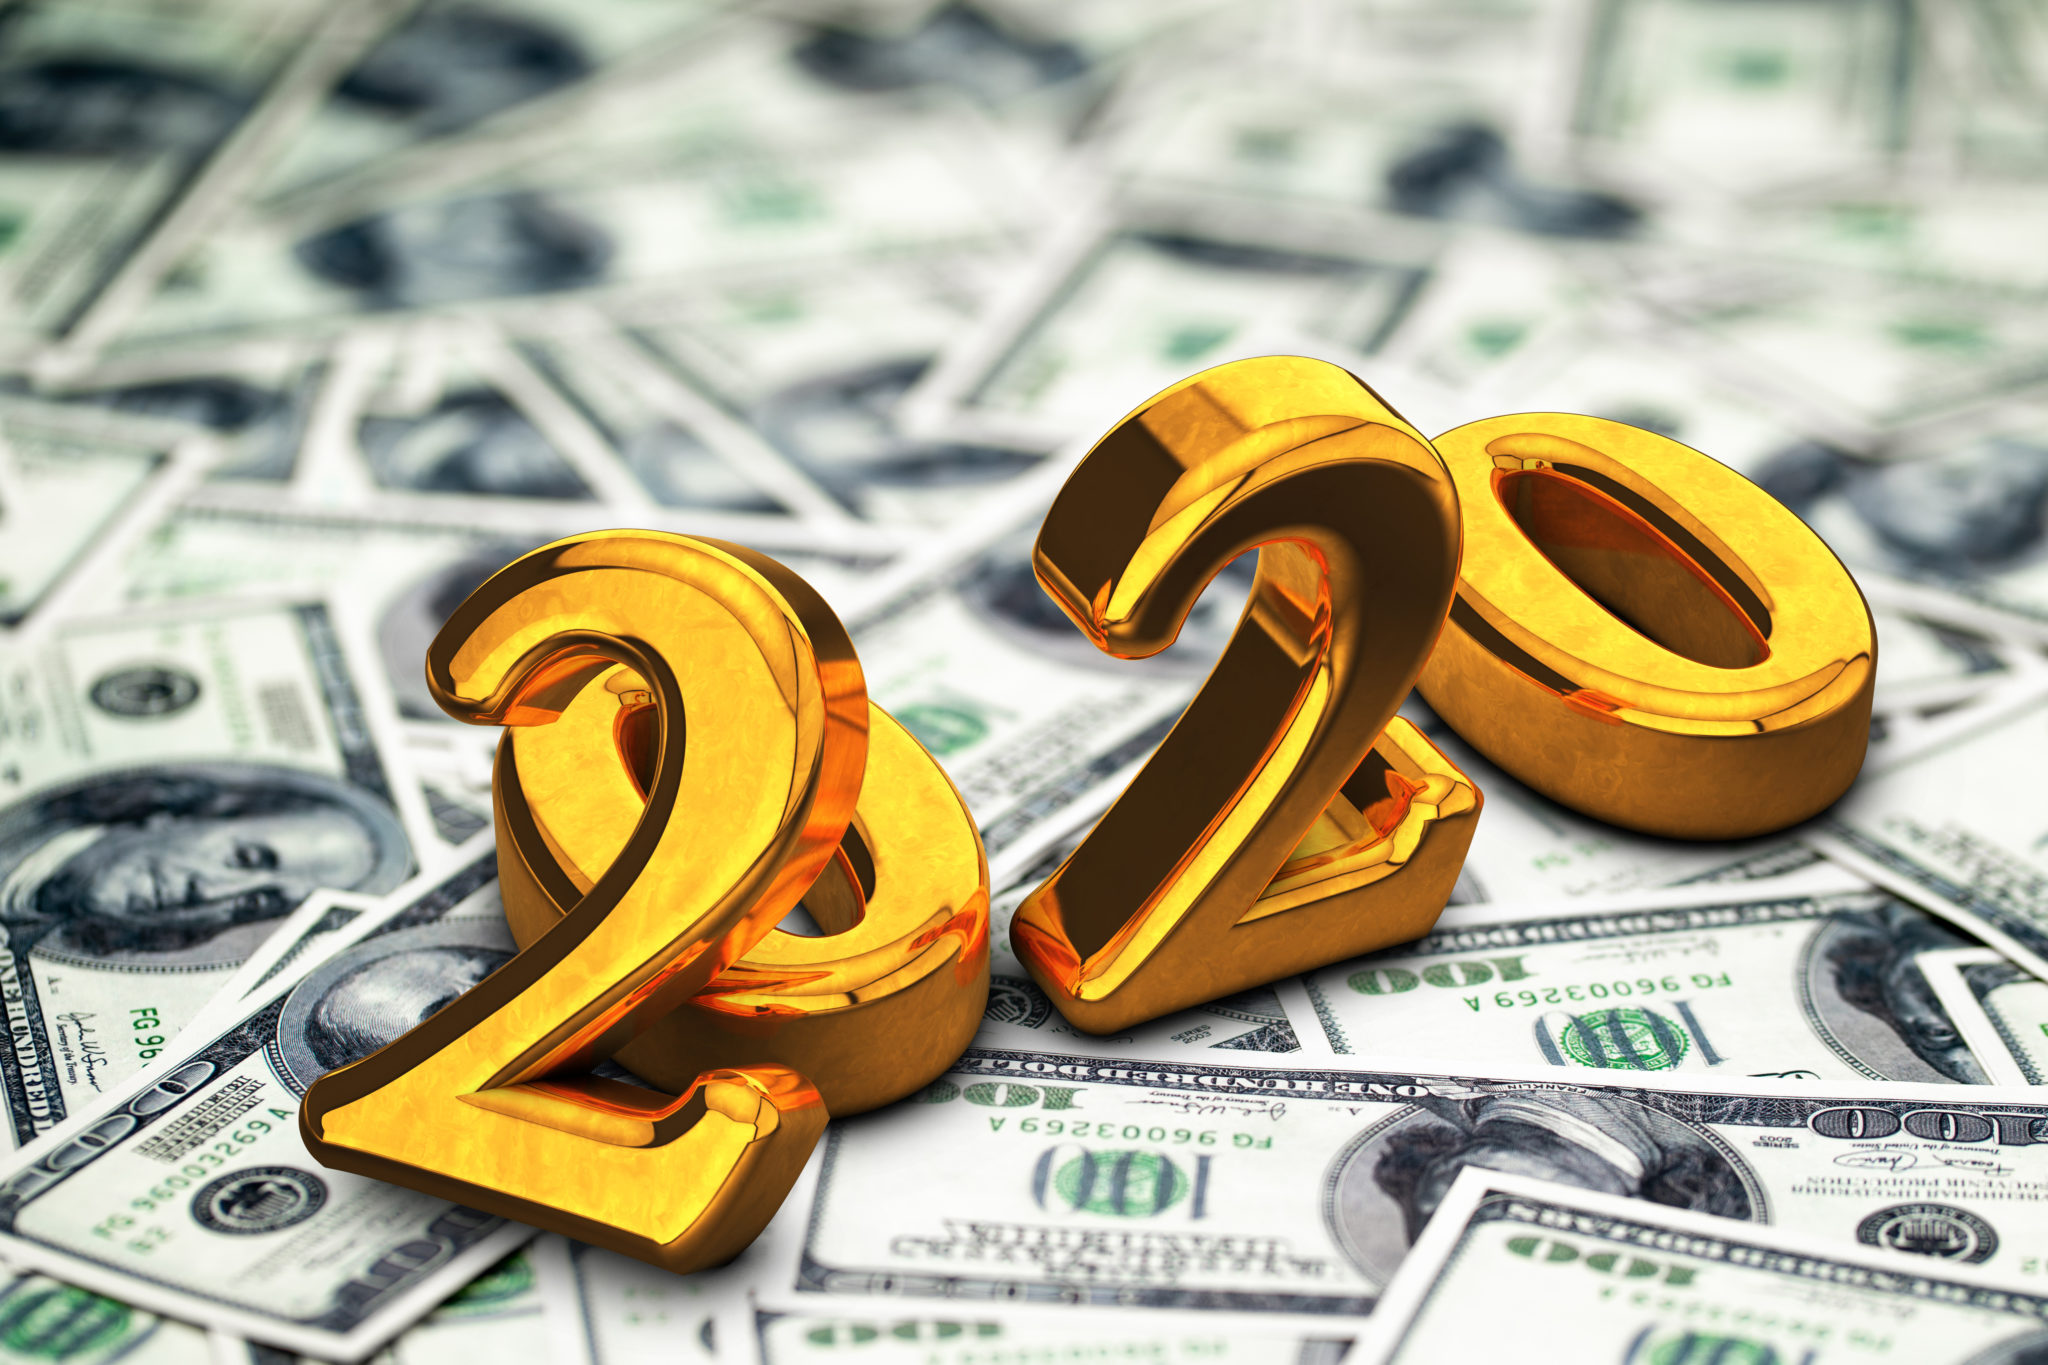 Concept of gold 2020 New Year text on maoney dollars background. 3D Render Image